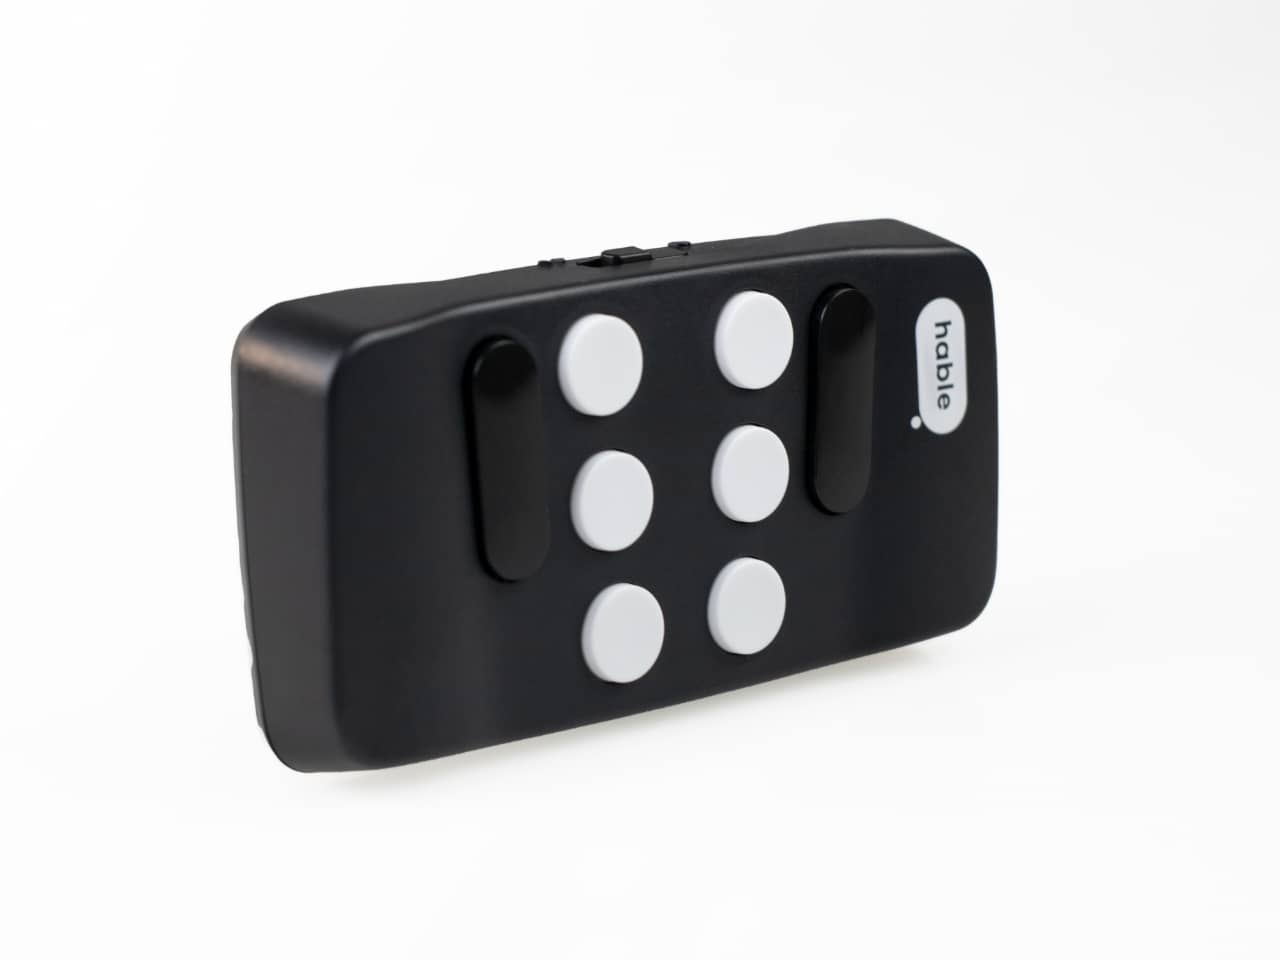 photo of the hable device from the front - a small black remote like size device with 6 white braille keys and 2 black rocker bars on either side